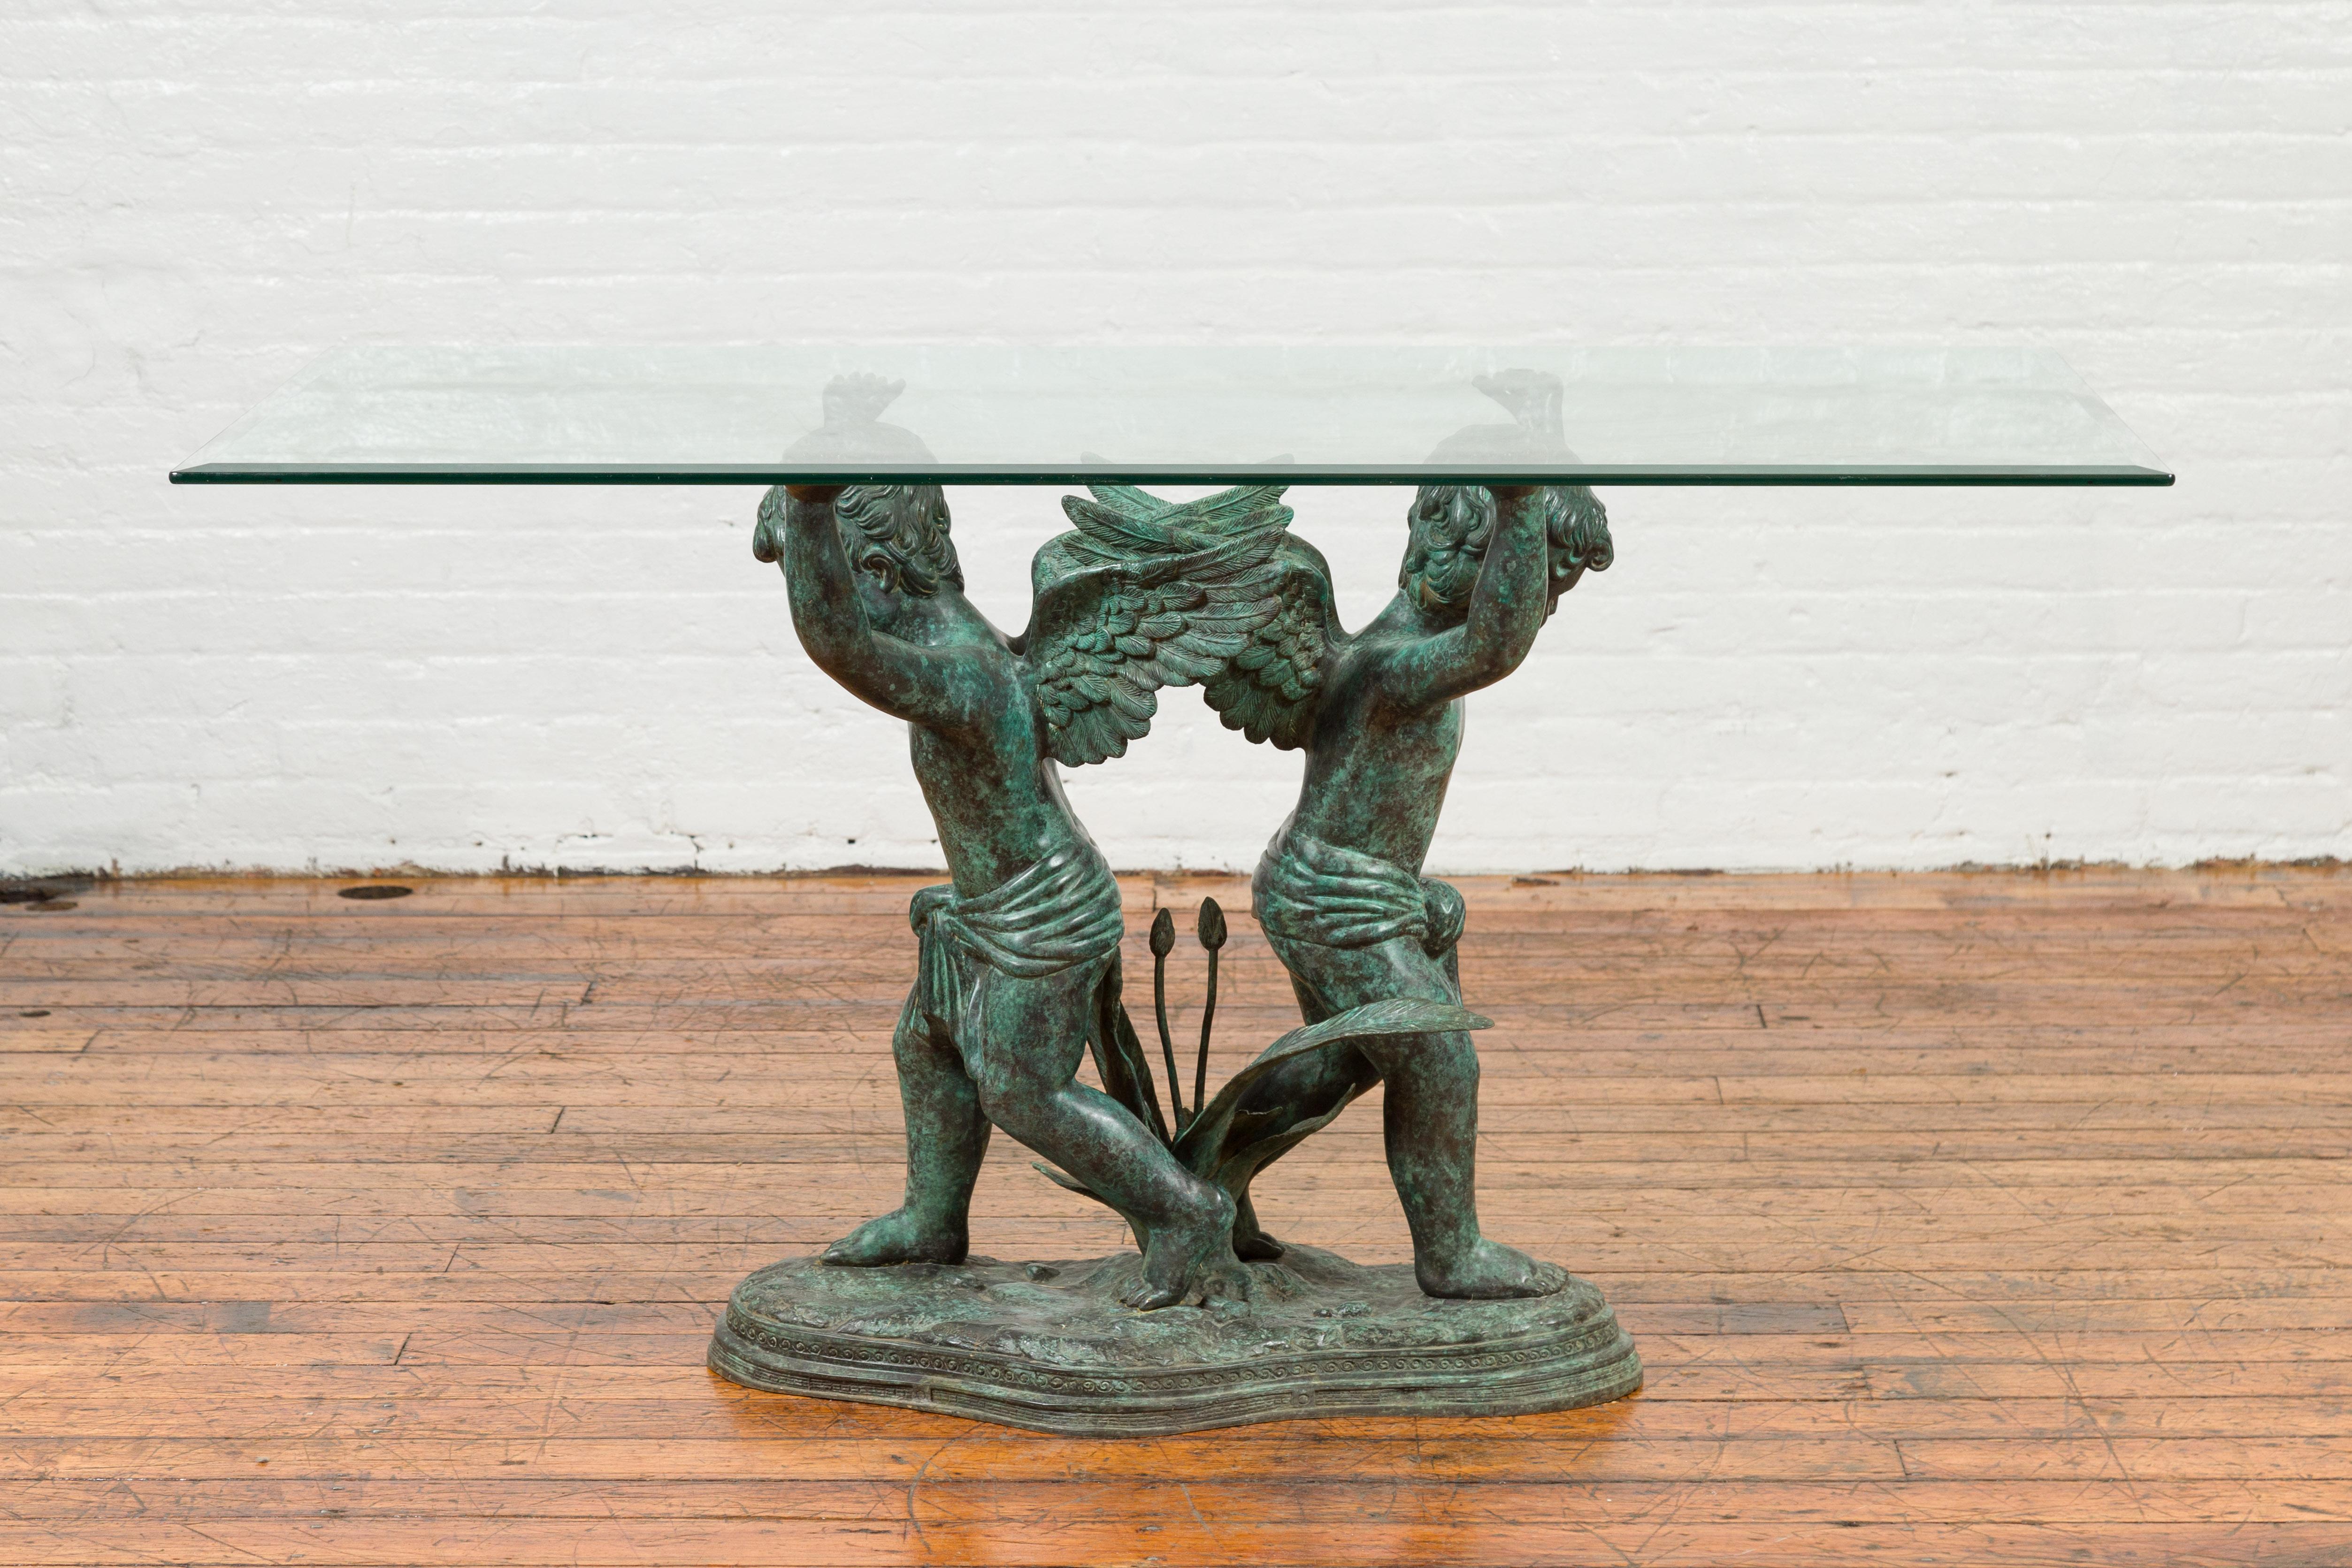 A Greco-Roman style contemporary bronze double cherub dining table base with Verde patina. The top is not included but shown on the photos to allow better visualization of the possibilities. Created with the traditional technique of the lost-wax (à